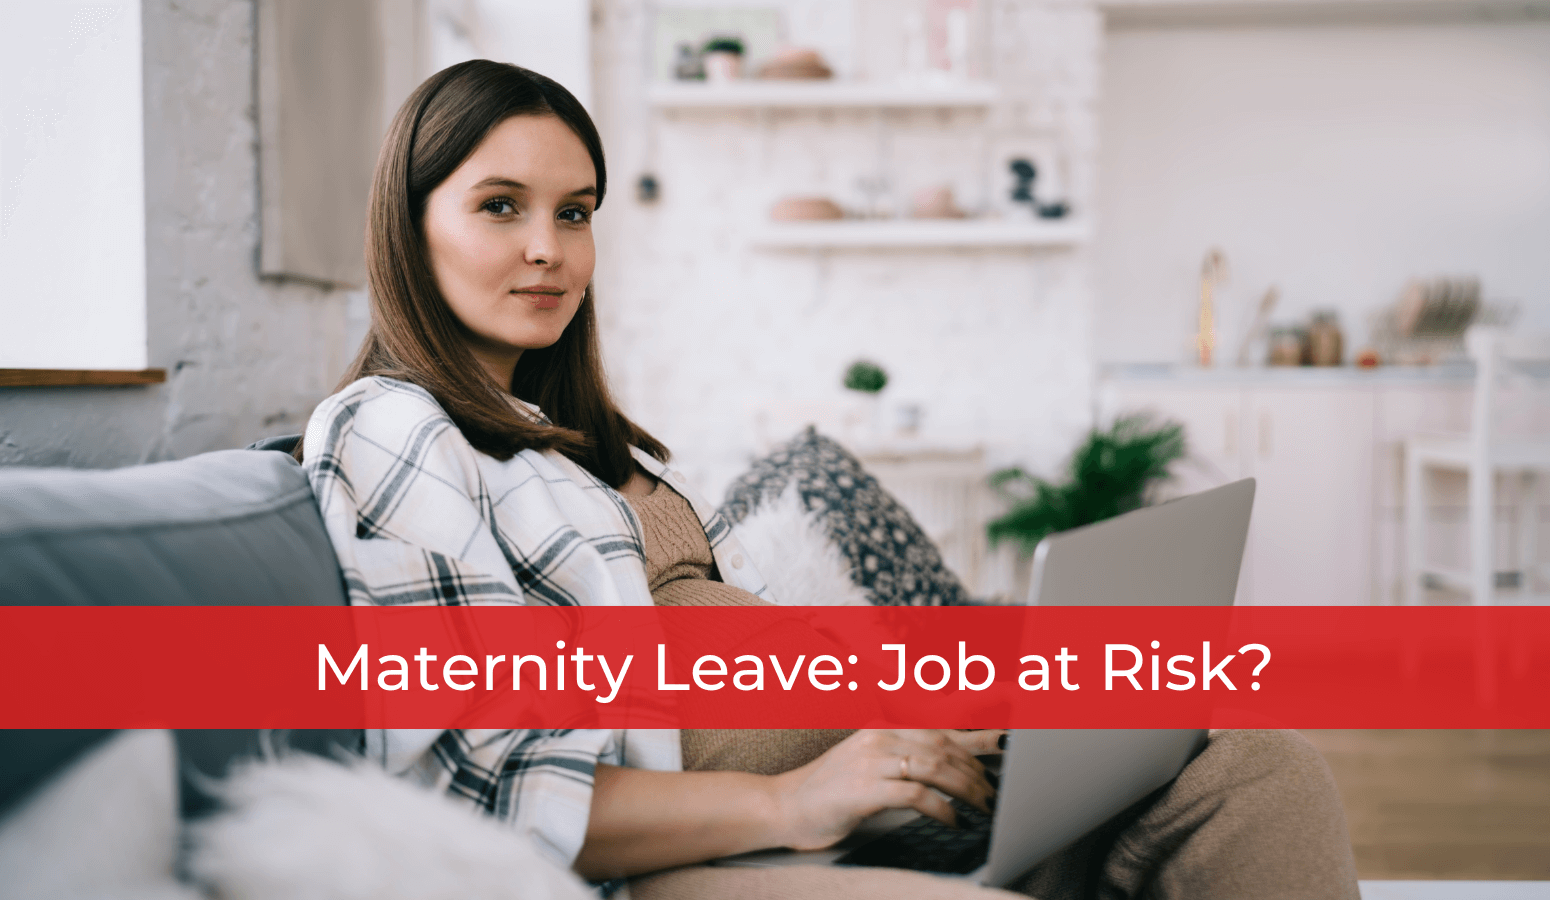 Featured image for “Maternity Leave: Job at Risk?”